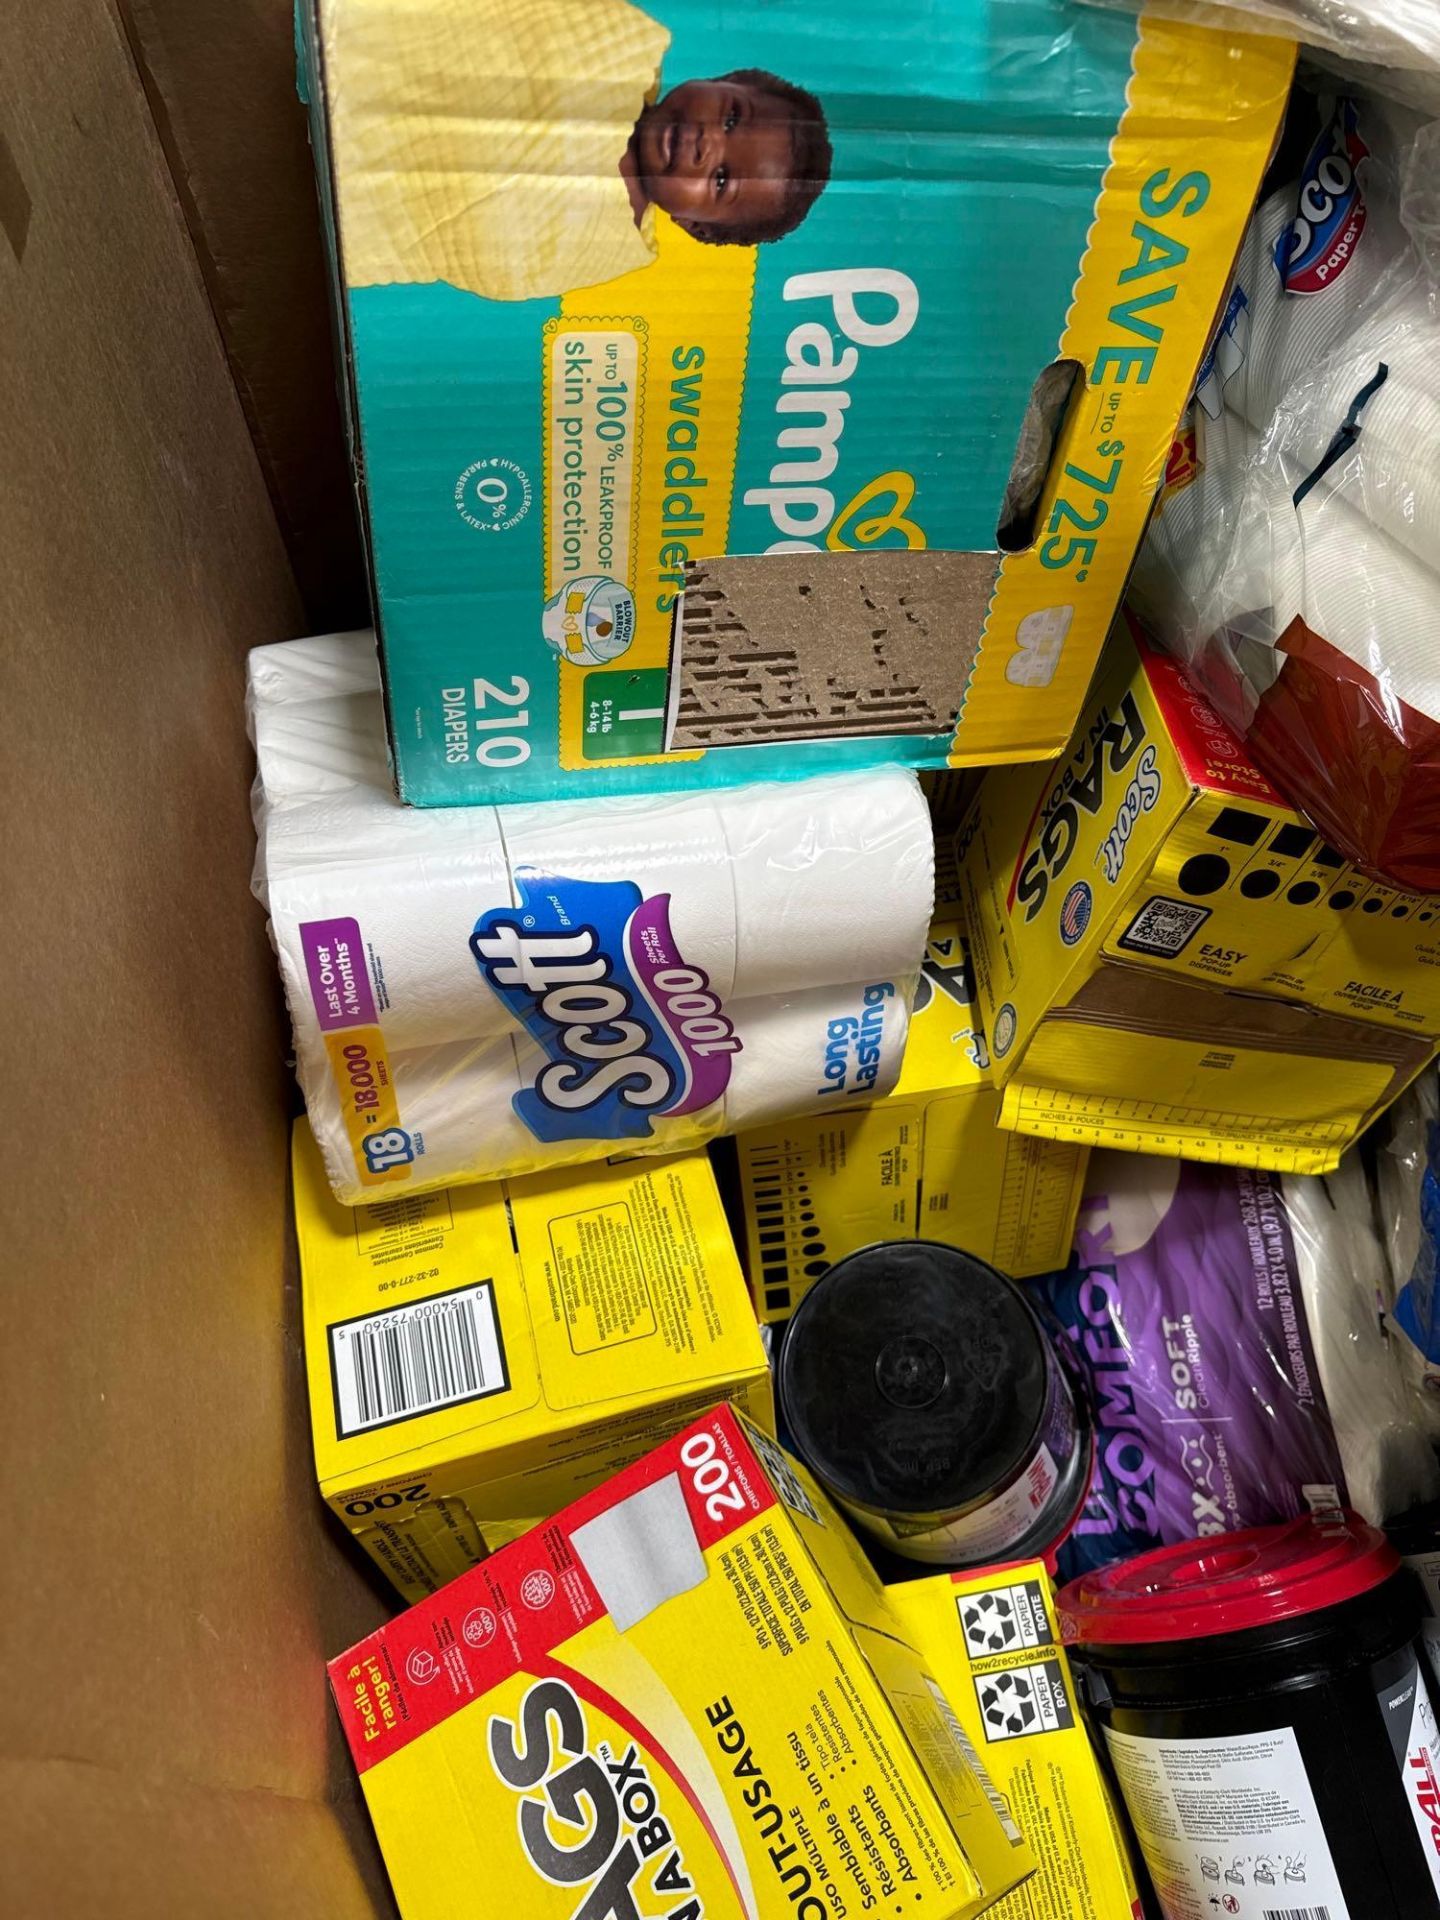 Scott Toilet paper, Cottoneel, Rags in a box, pampers proscrub and more - Image 3 of 6